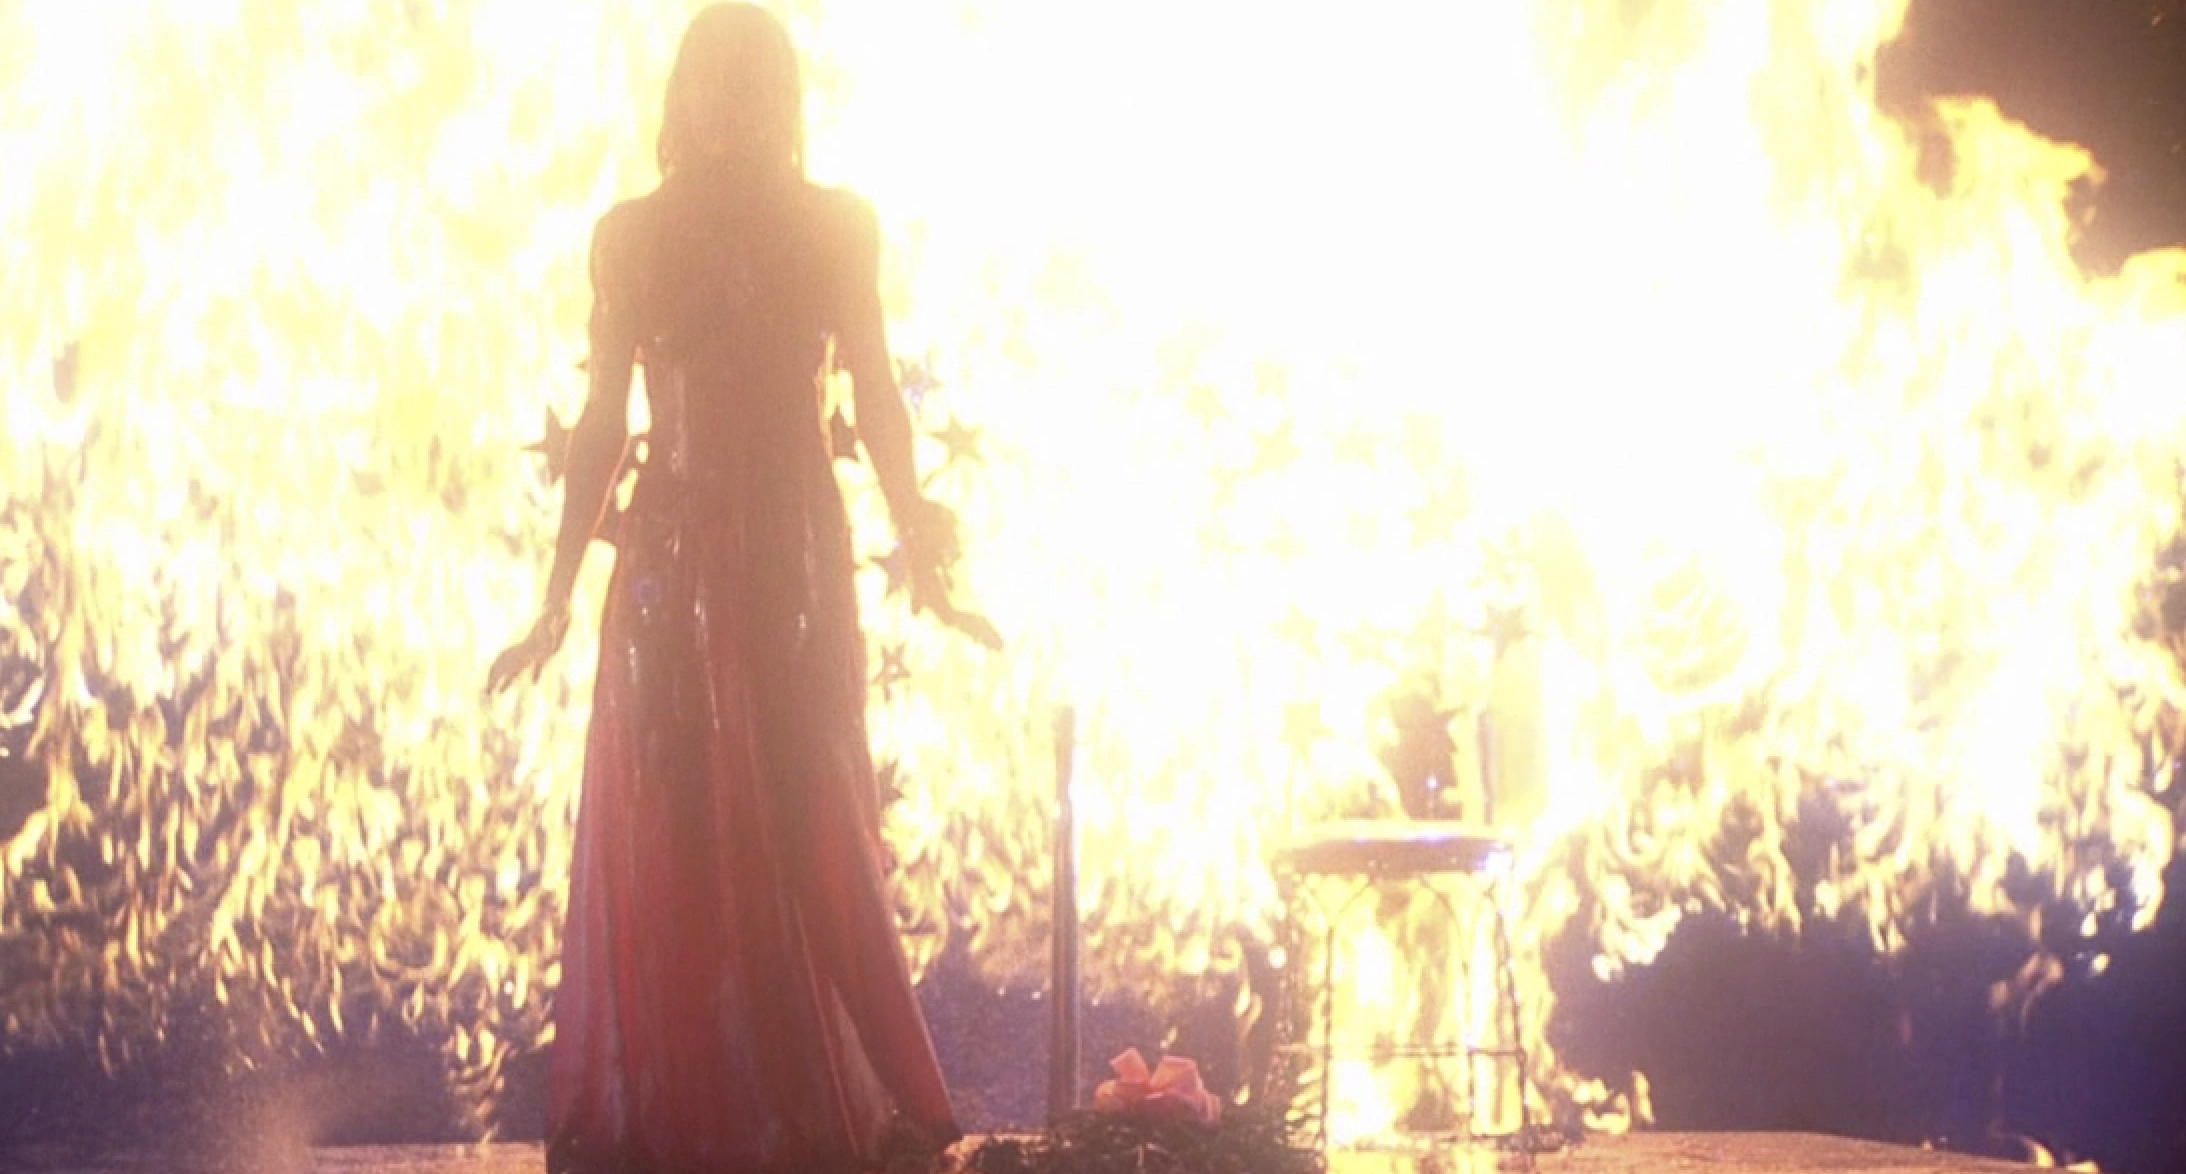 Carrie stands onstage covered in blood as everything around her is engulfed in flames